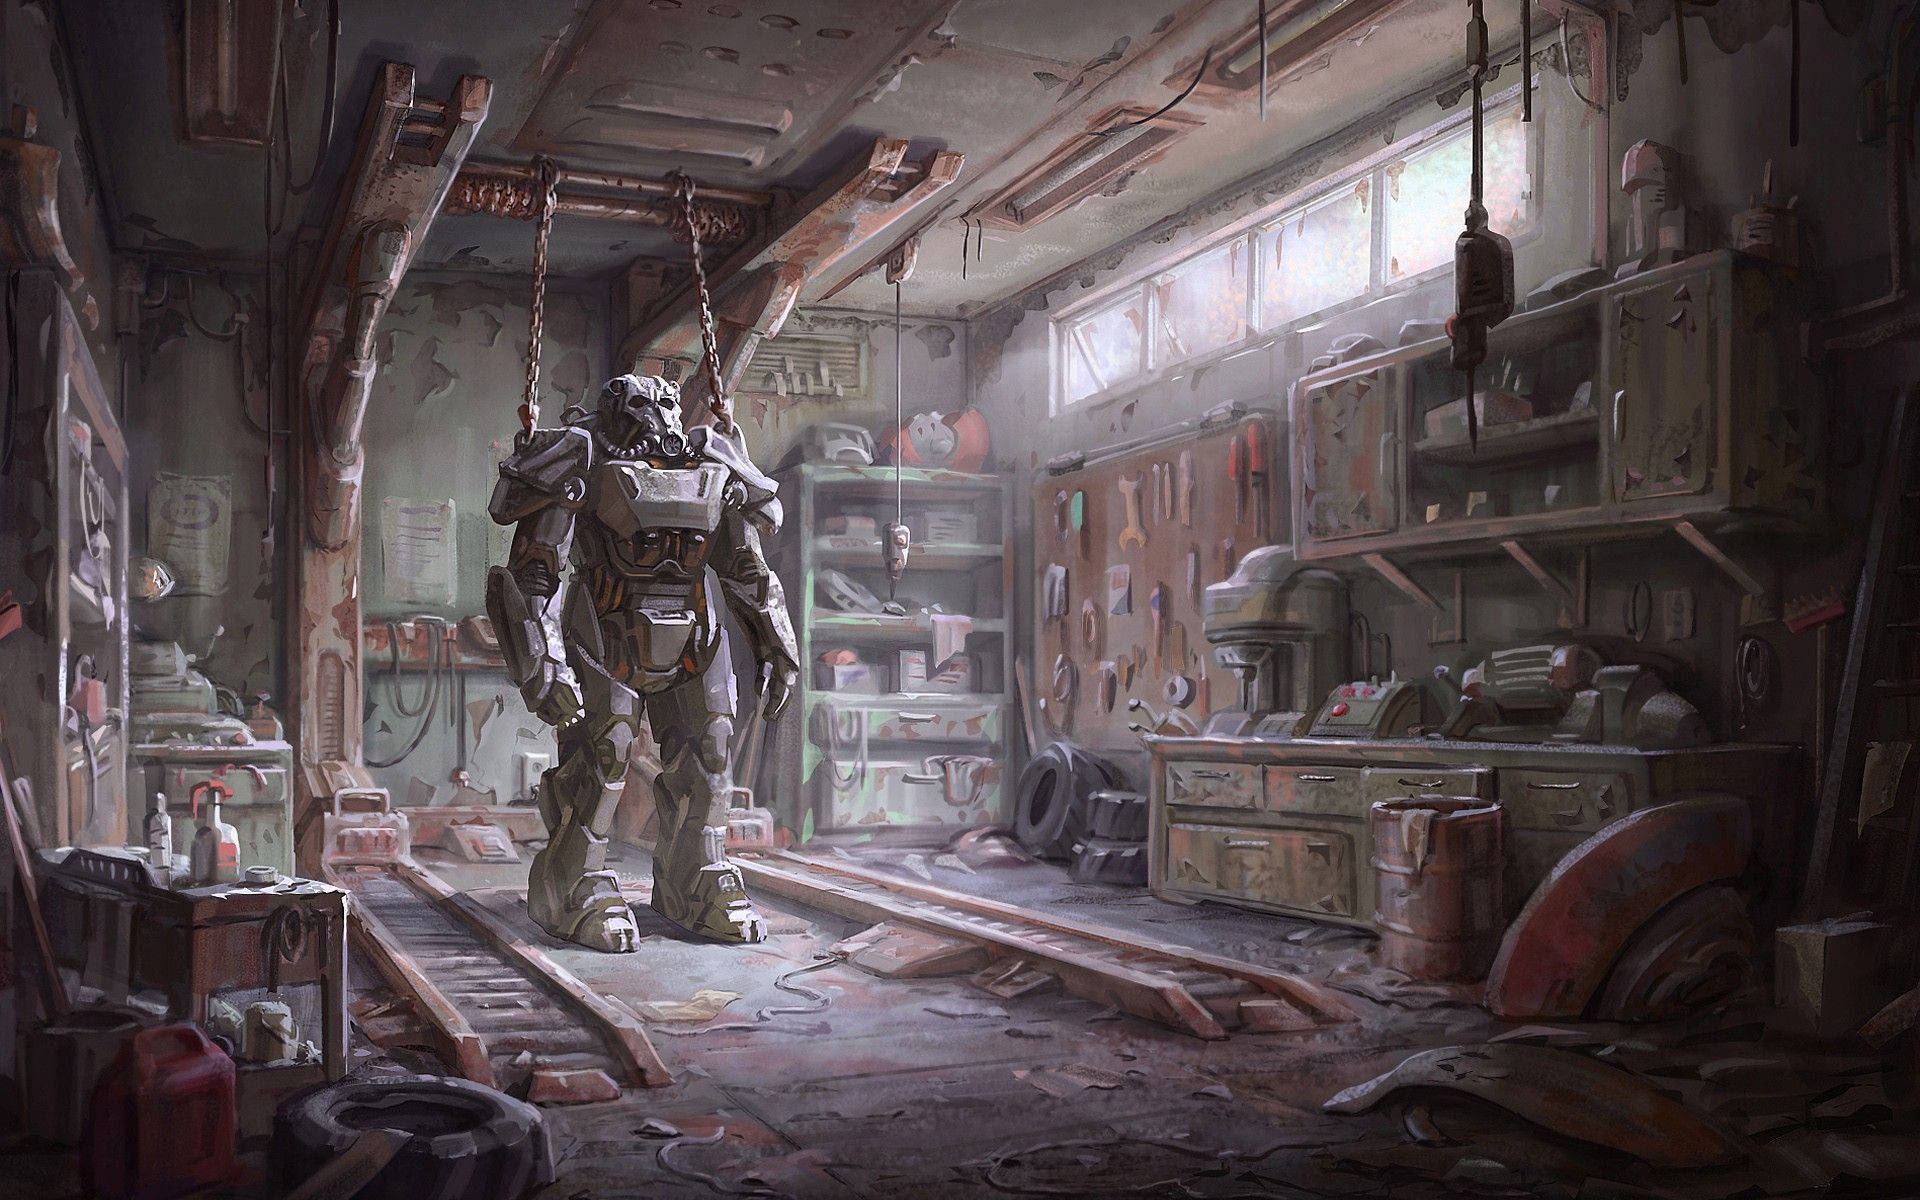 “Unlock Your Power with Chained Power Armor in Fallout 4!